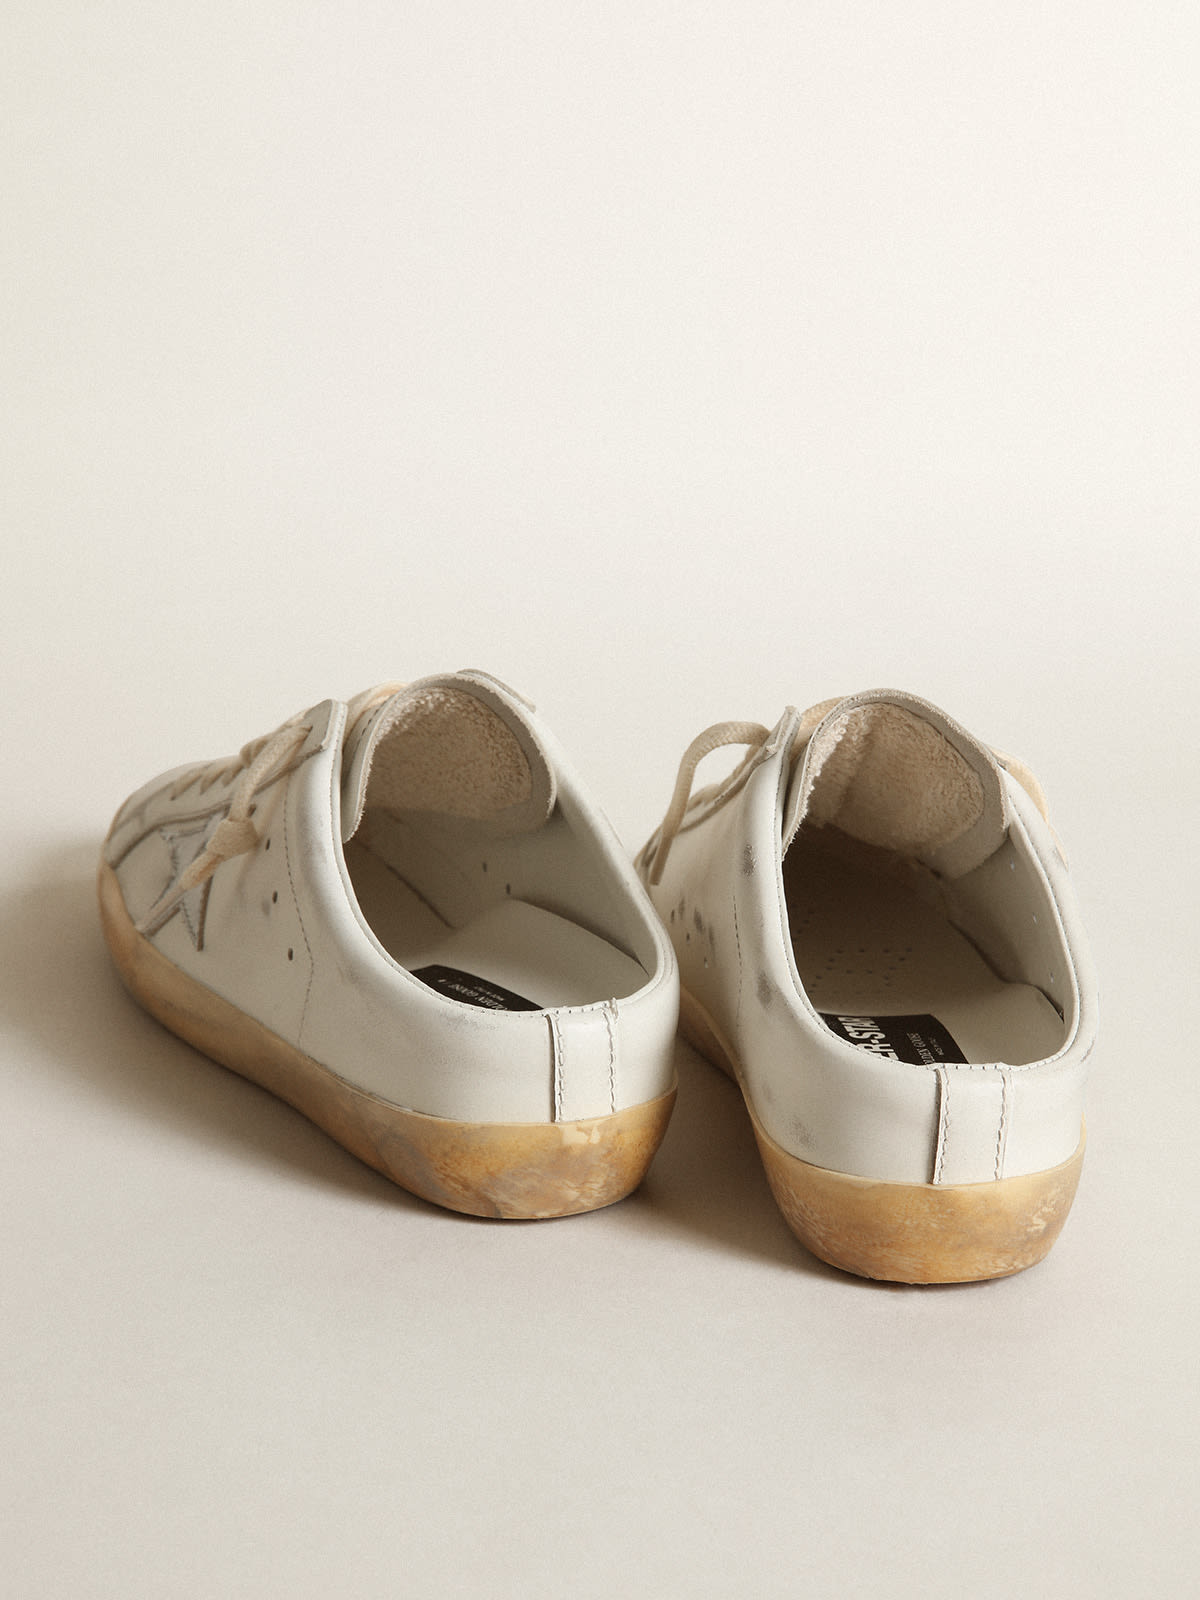 Golden Goose - Super-Star Sabots in white leather with silver metallic leather star in 